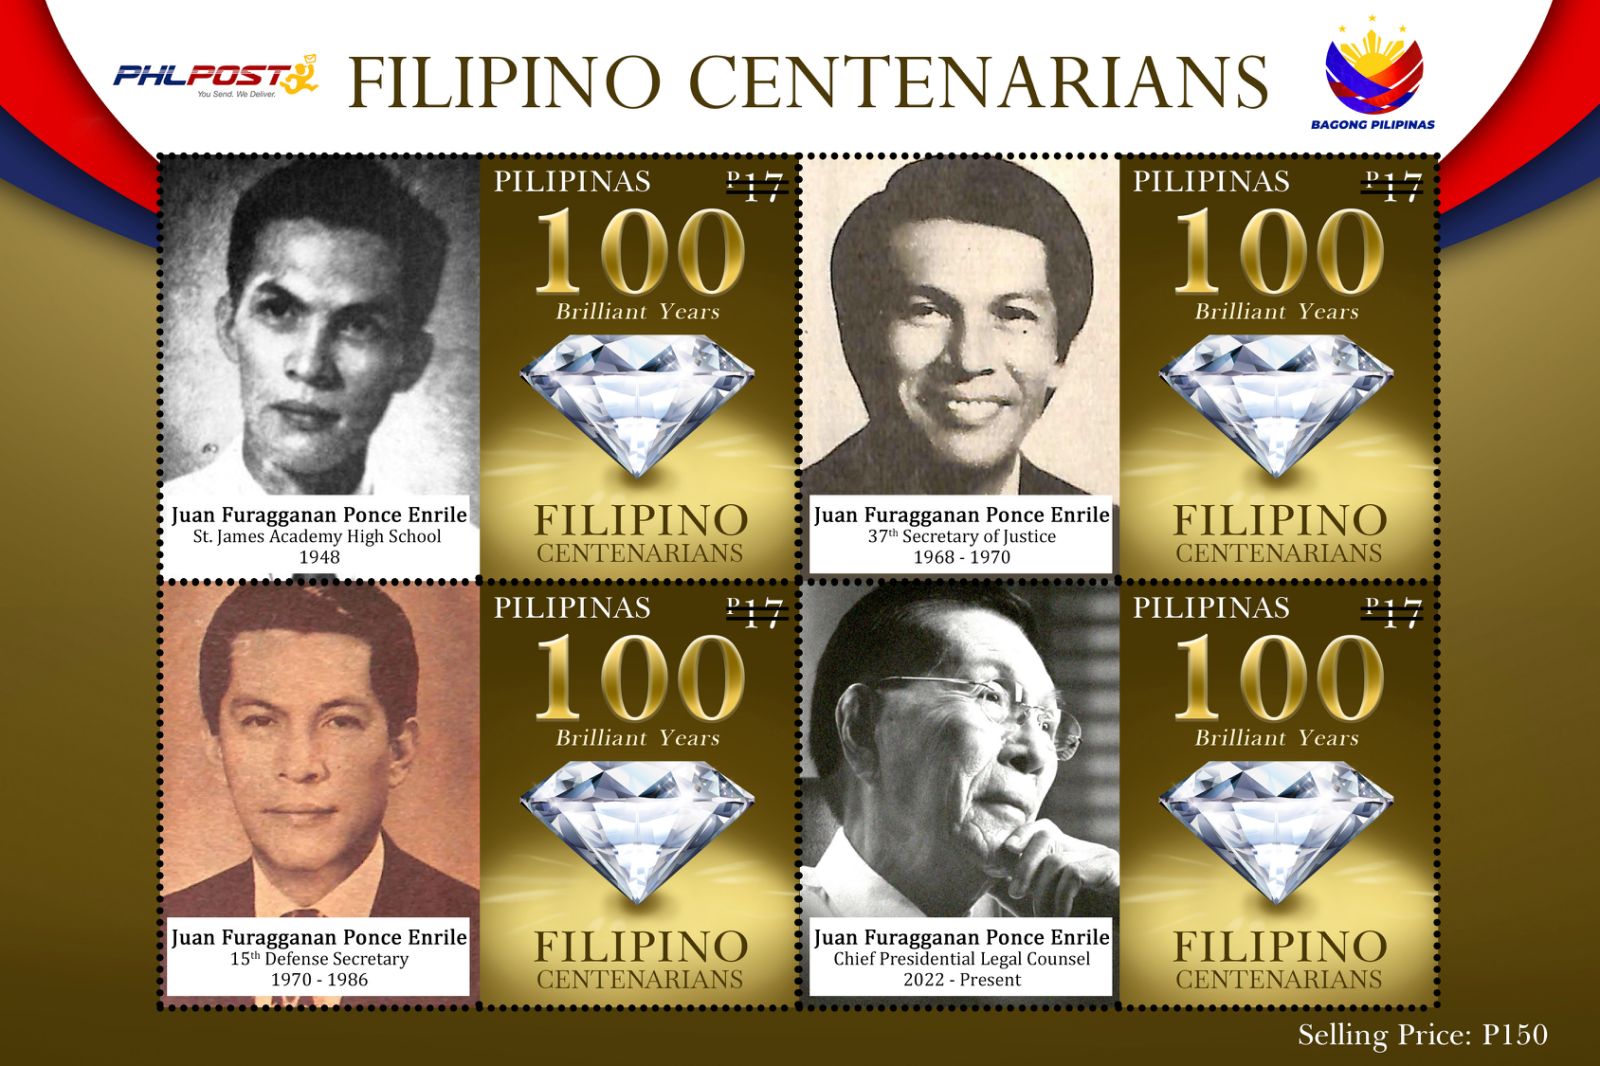 PHLPost presented personalized stamps to 100 year old Enrile